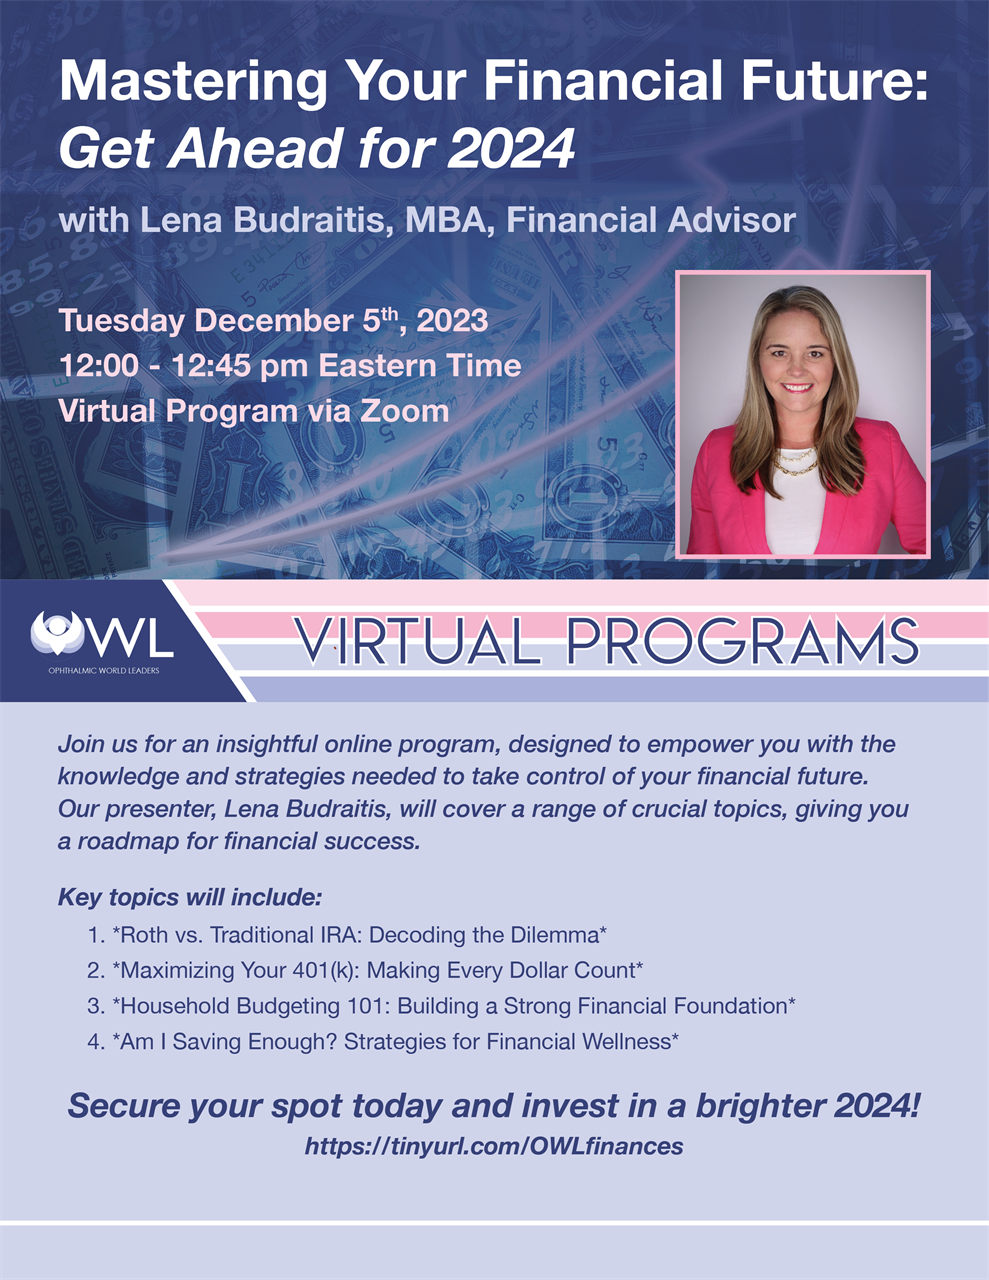 "Mastering Your Financial Future: Get Ahead for 2024" w/ Presenter: Linda Budraitis (Tuesday, December 5, 2023; 12-12:45 PM ET; Online) Join us for an engaging and insightful webinar designed to empower you with the knowledge and strategies needed to take control of your financial future. Our presenter, Lena Budraitis, MBA, will cover a range of crucial topics, giving you a roadmap for financial success. **As you register, let us know which areas you are most interested in learning about. Key topics will include:** 1. **Roth vs. Traditional IRA: Decoding the Dilemma** - Understand the nuances of Roth and Traditional IRAs. - Learn which option aligns best with your long-term financial goals. - Uncover the tax implications and advantages of each. 2. **Maximizing Your 401(k): Making Every Dollar Count** - Determine the optimal contribution amount for your 401(k). - Gain insights into handling old 401(k)s when changing jobs. - Explore investment strategies to make your retirement savings work harder for you. 3. **Household Budgeting 101: Building a Strong Financial Foundation** - Practical tips for creating and sticking to a realistic budget. - Identify areas for potential savings without sacrificing your lifestyle. - Tools and apps to streamline your budgeting process. 4. **Am I Saving Enough? Strategies for Financial Wellness** - Assess if your current savings align with your future financial goals. - Explore ways to boost your savings without disrupting your lifestyle. - Tips for adapting your savings plan as life evolves. - Discover how to strike the right balance between enjoying the present and securing your future. Don't miss this opportunity to gain valuable insights, ask your burning financial questions, and embark on a journey towards financial mastery. Secure your spot today and invest in a brighter 2024! 